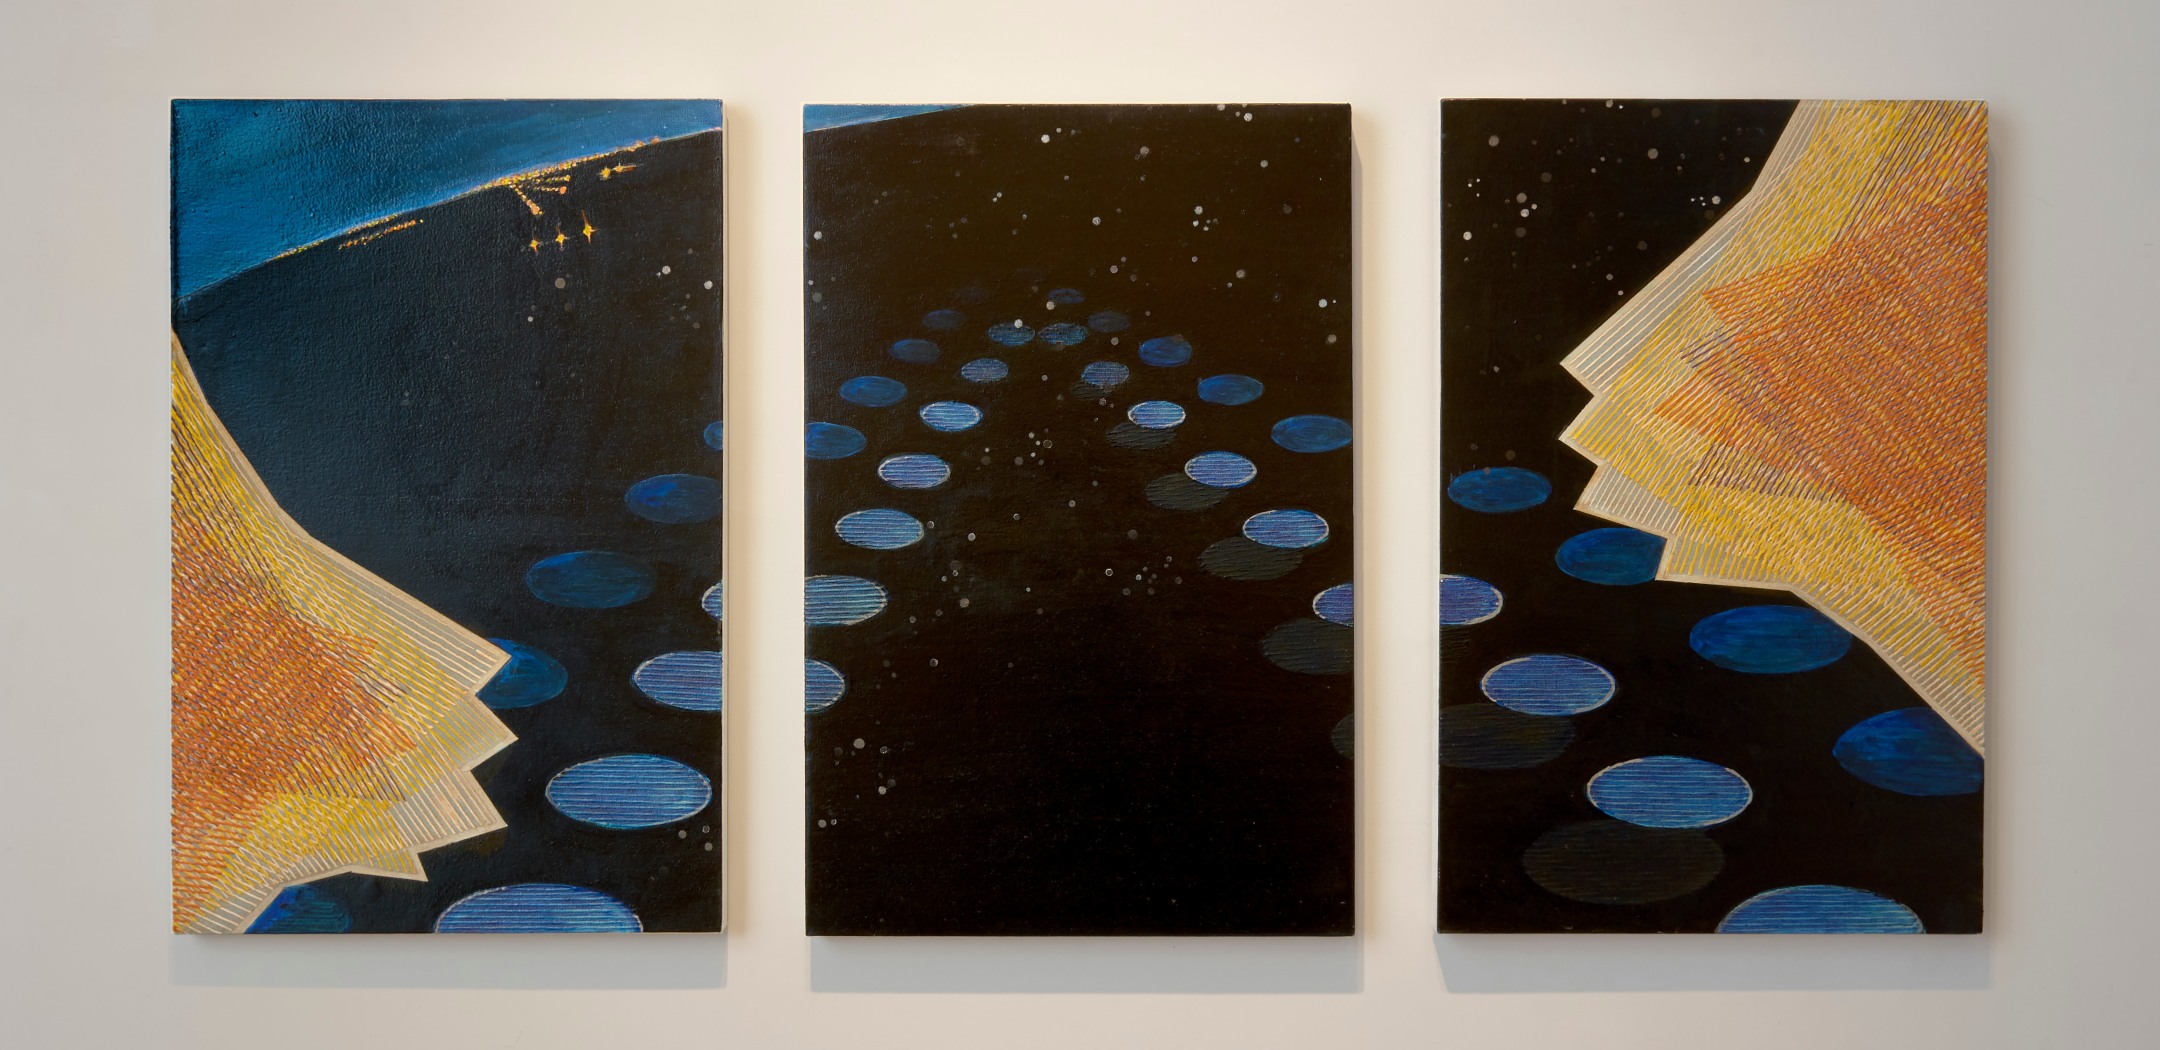 Michiko Itatani  Night Wing from Infinite Vision IV-5, 2006  Oil on canvas  canvas: 35 x 79 inches 3 panels, 35 x 23 inches each; 1-6&quot; intervals  signed and dated en verso